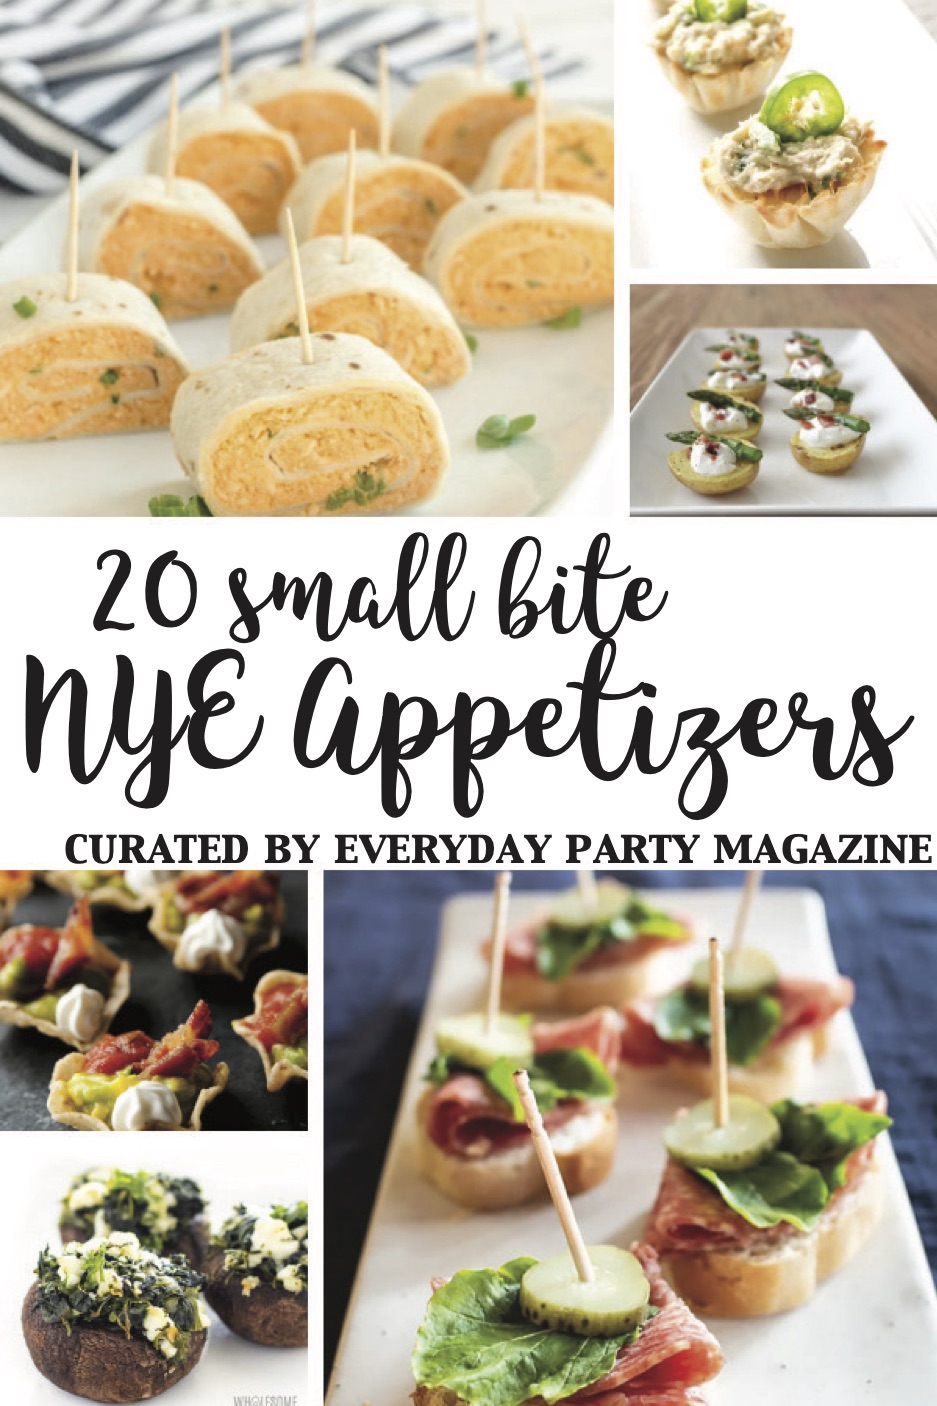 20 Small Bite New Year's Eve Appetizers - Everyday Party Magazine